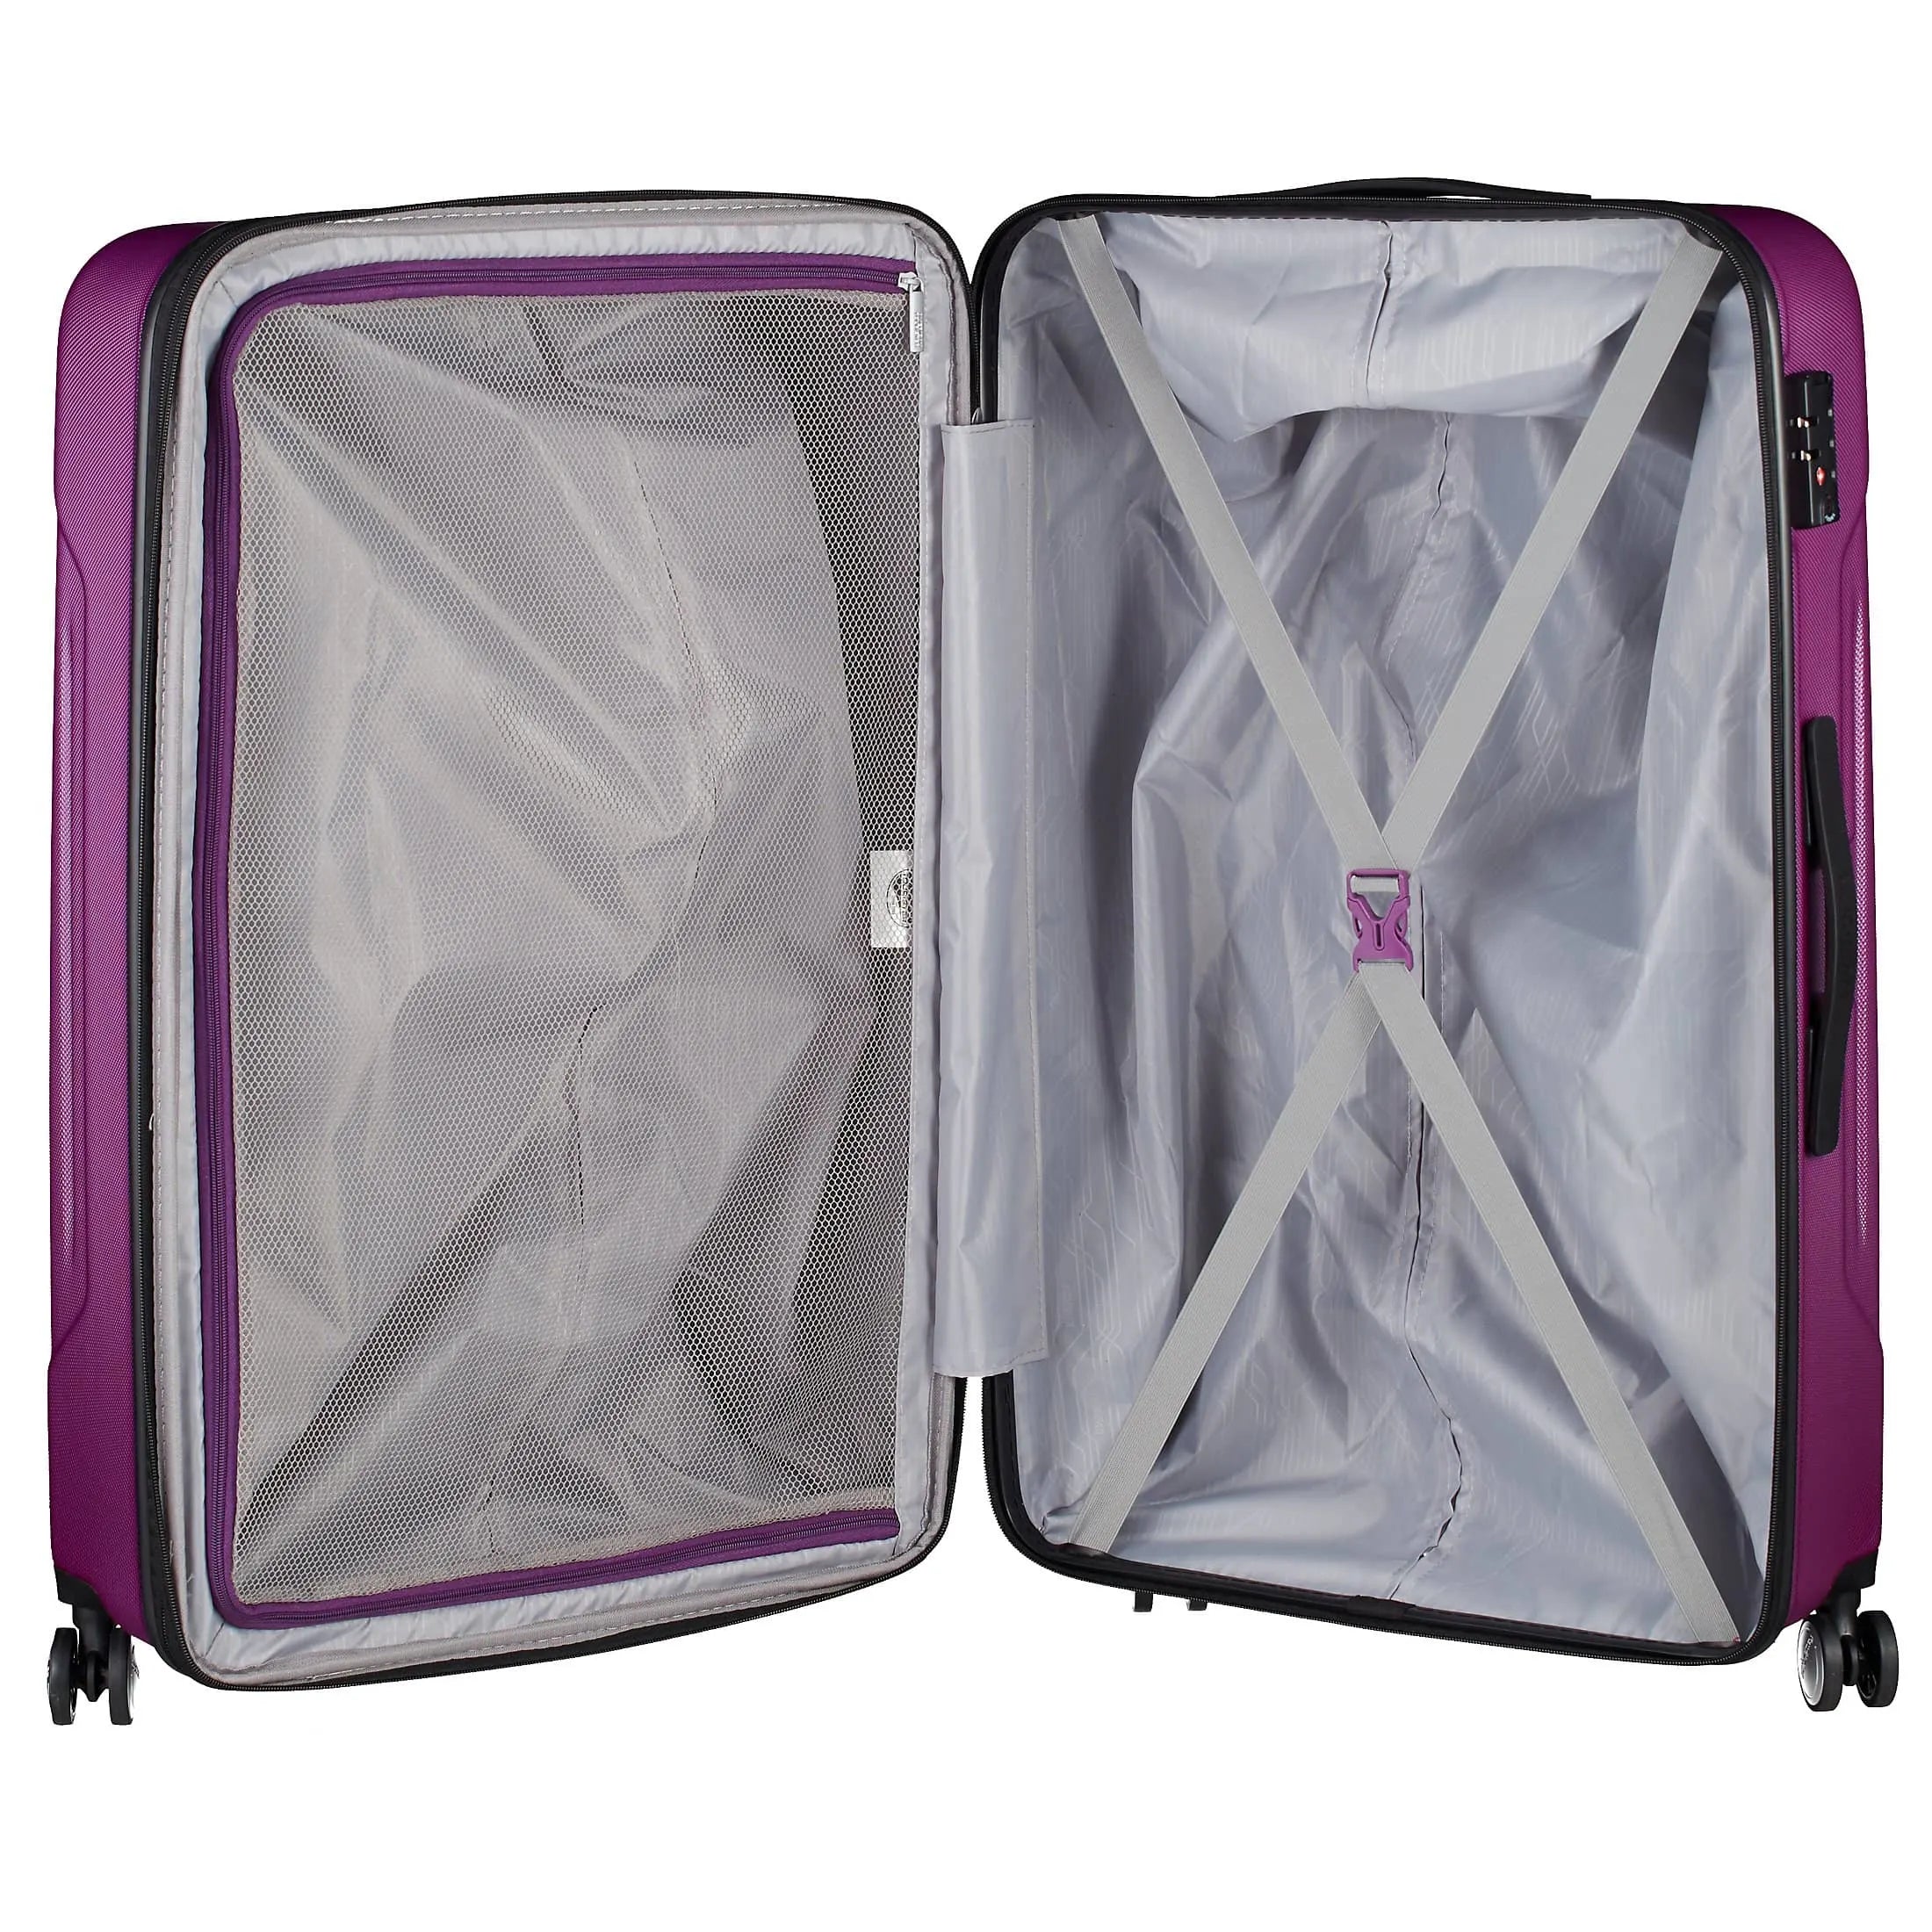 American Tourister Tracklite trolley 4 roues 67 cm - argent